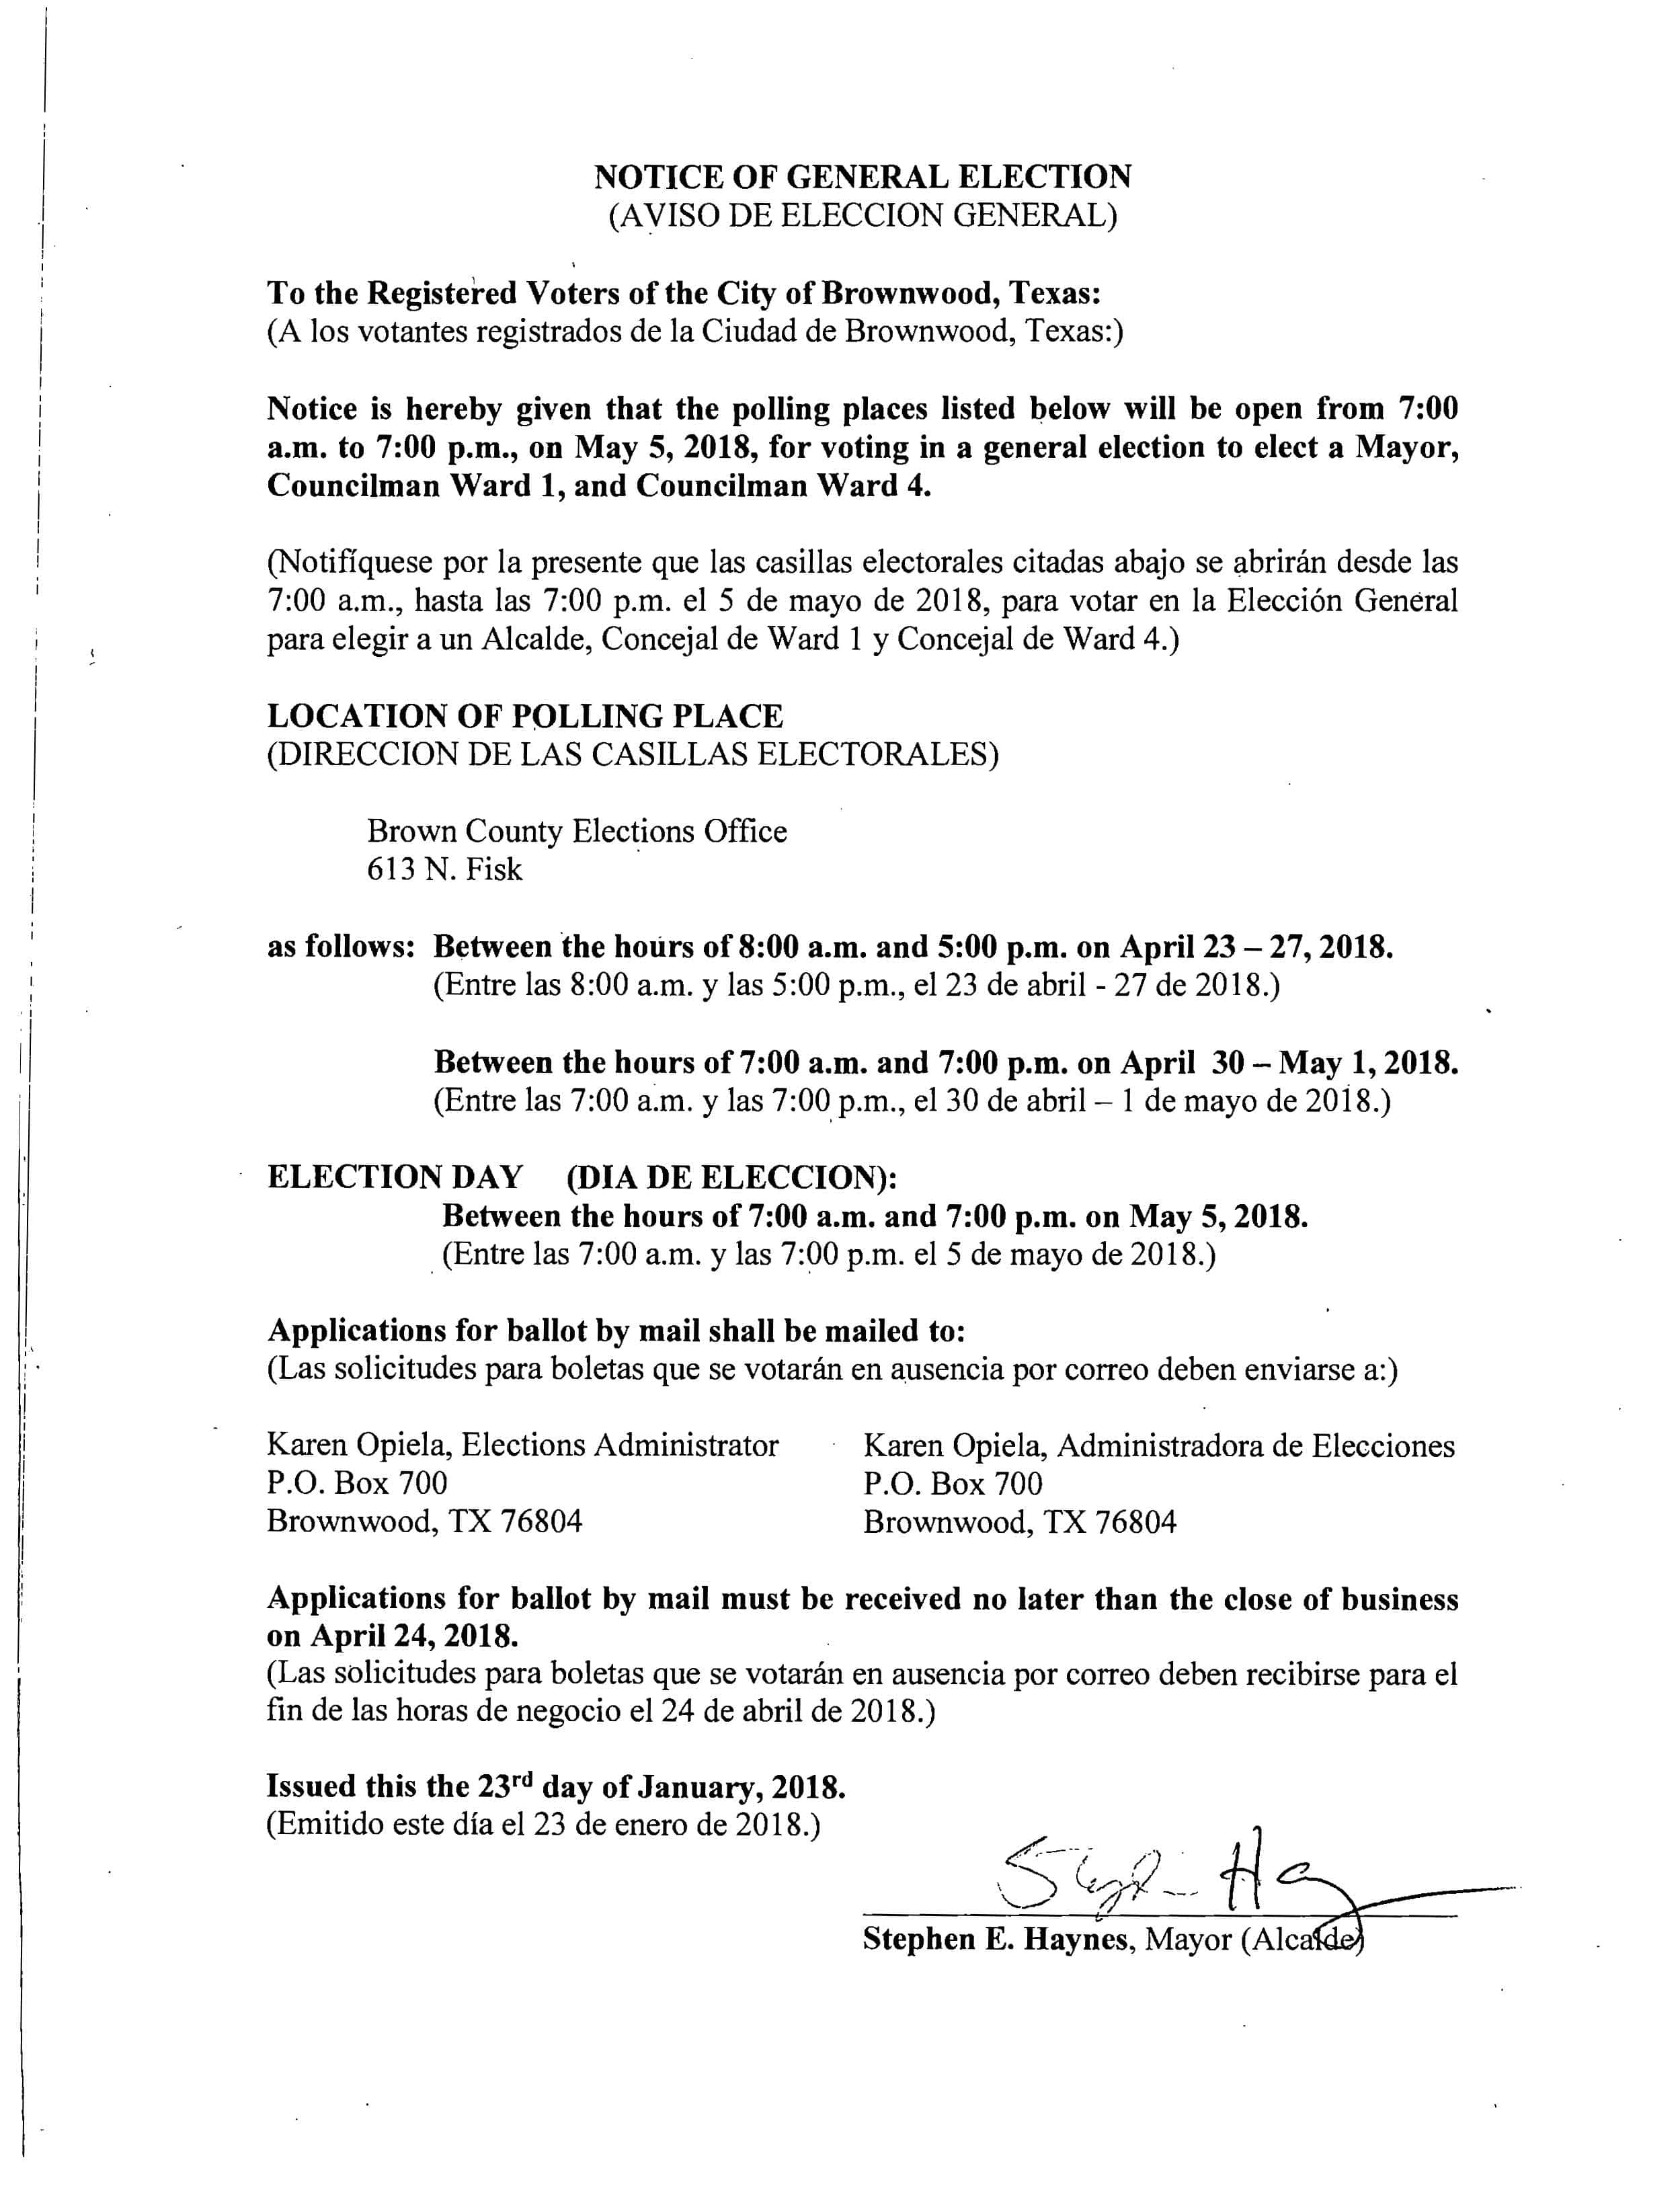 Notice Of Election Signed 18 Brownwood News